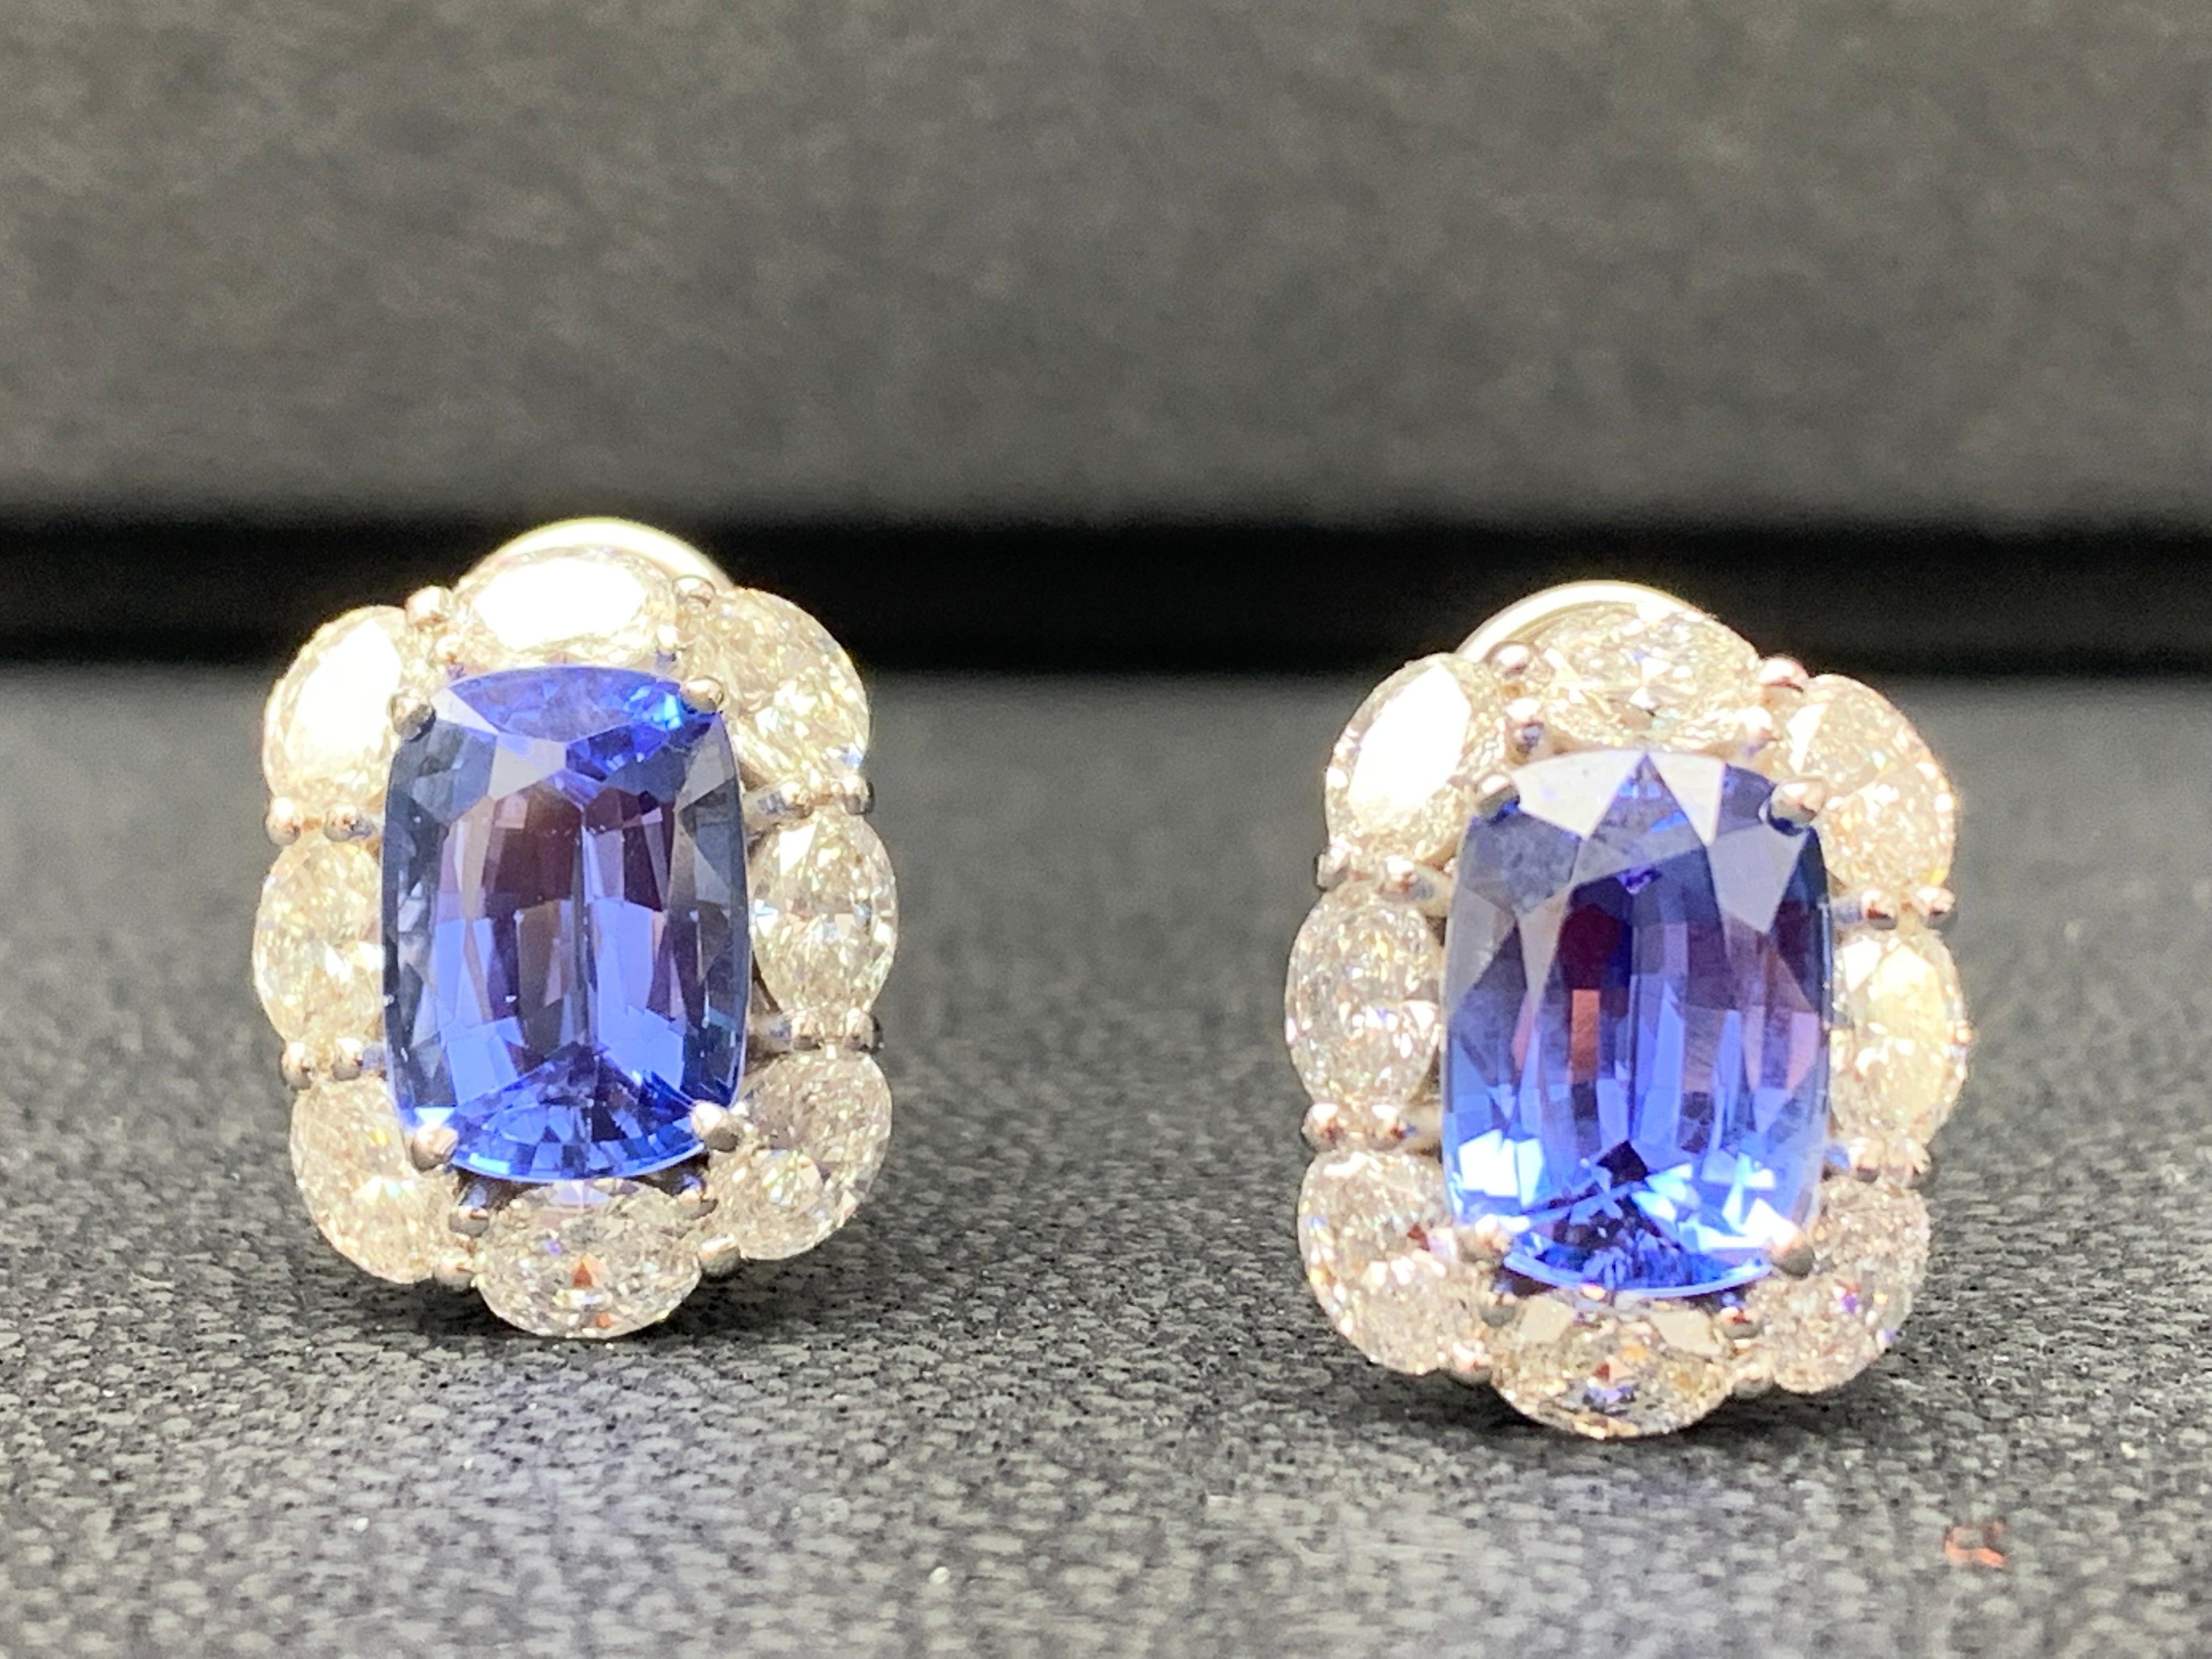 Showcasing two color-rich Certified Cushion cut Vivid Blue Sapphires weighing 8.49 carats total, surrounded by a single row of oval cut brilliant diamonds. 16 Accent diamonds weigh 3.19 carats total. Set in 18 karats white gold. Omega Clip with the